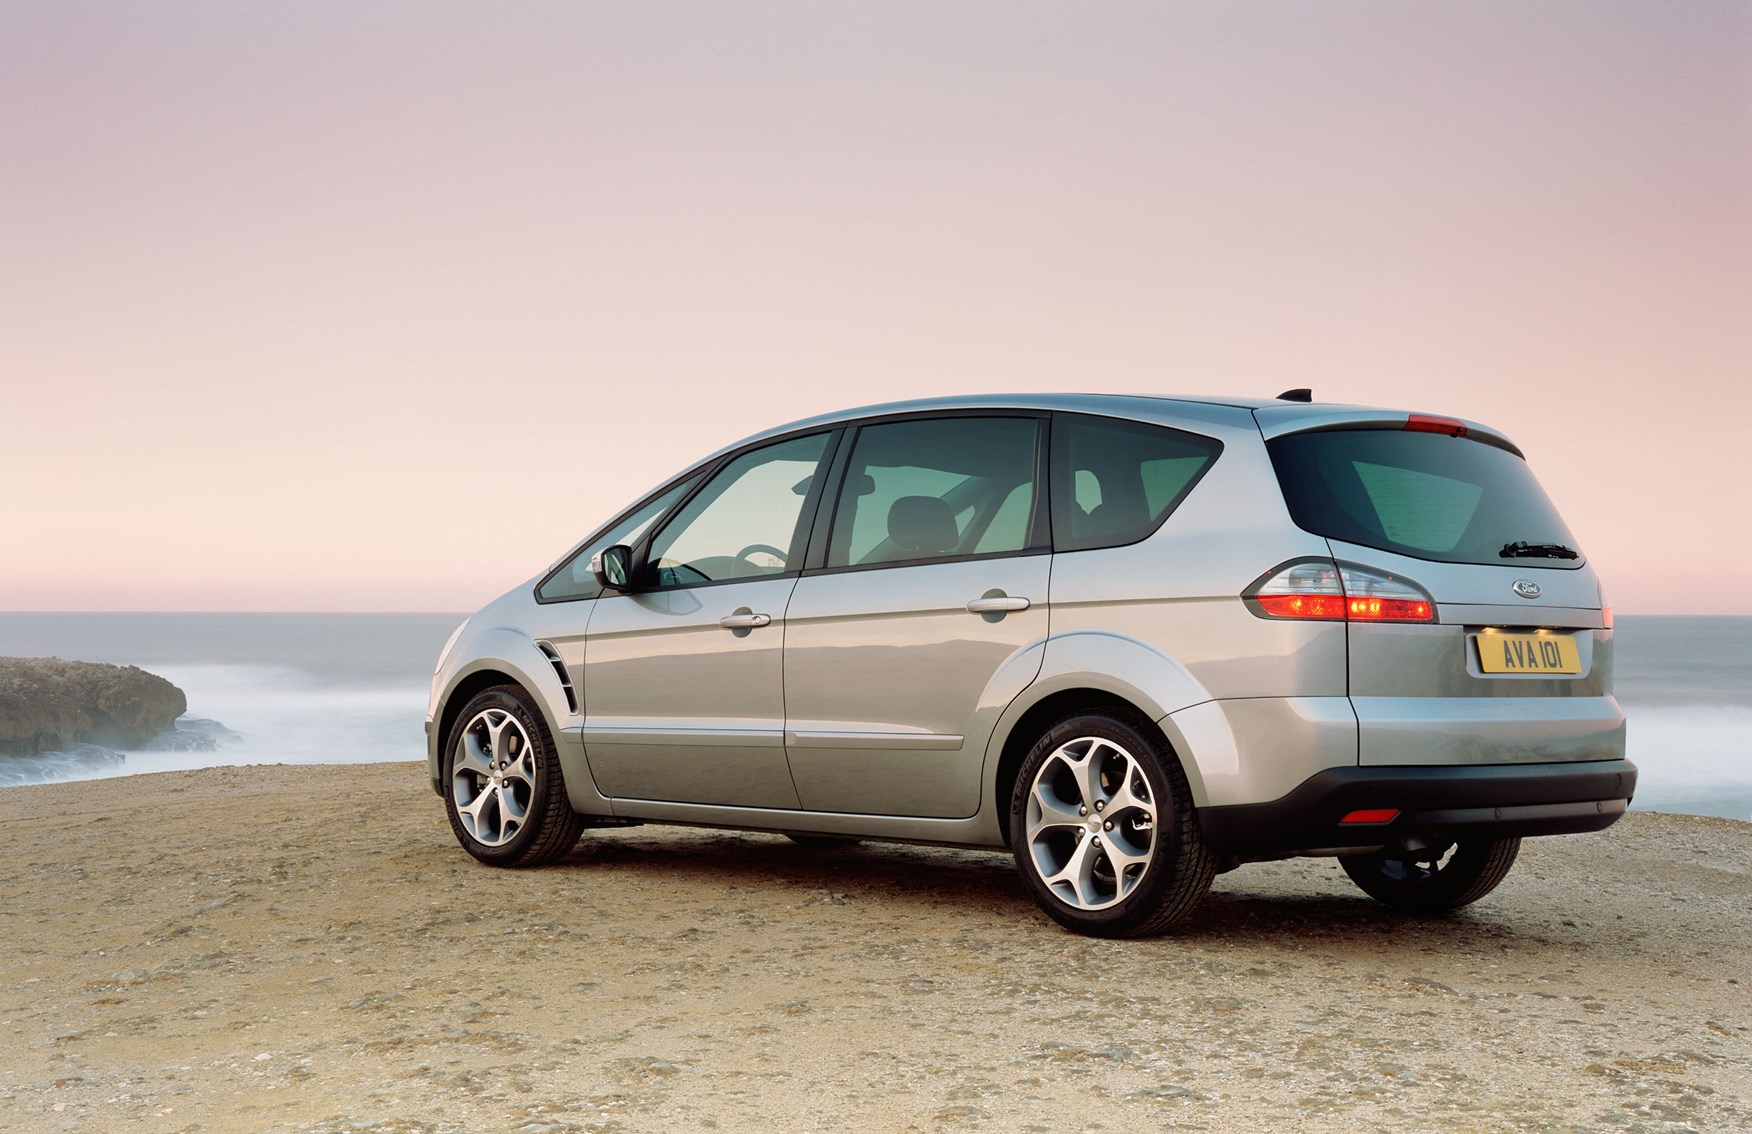 Used Ford S-MAX Estate (2006 - 2014 